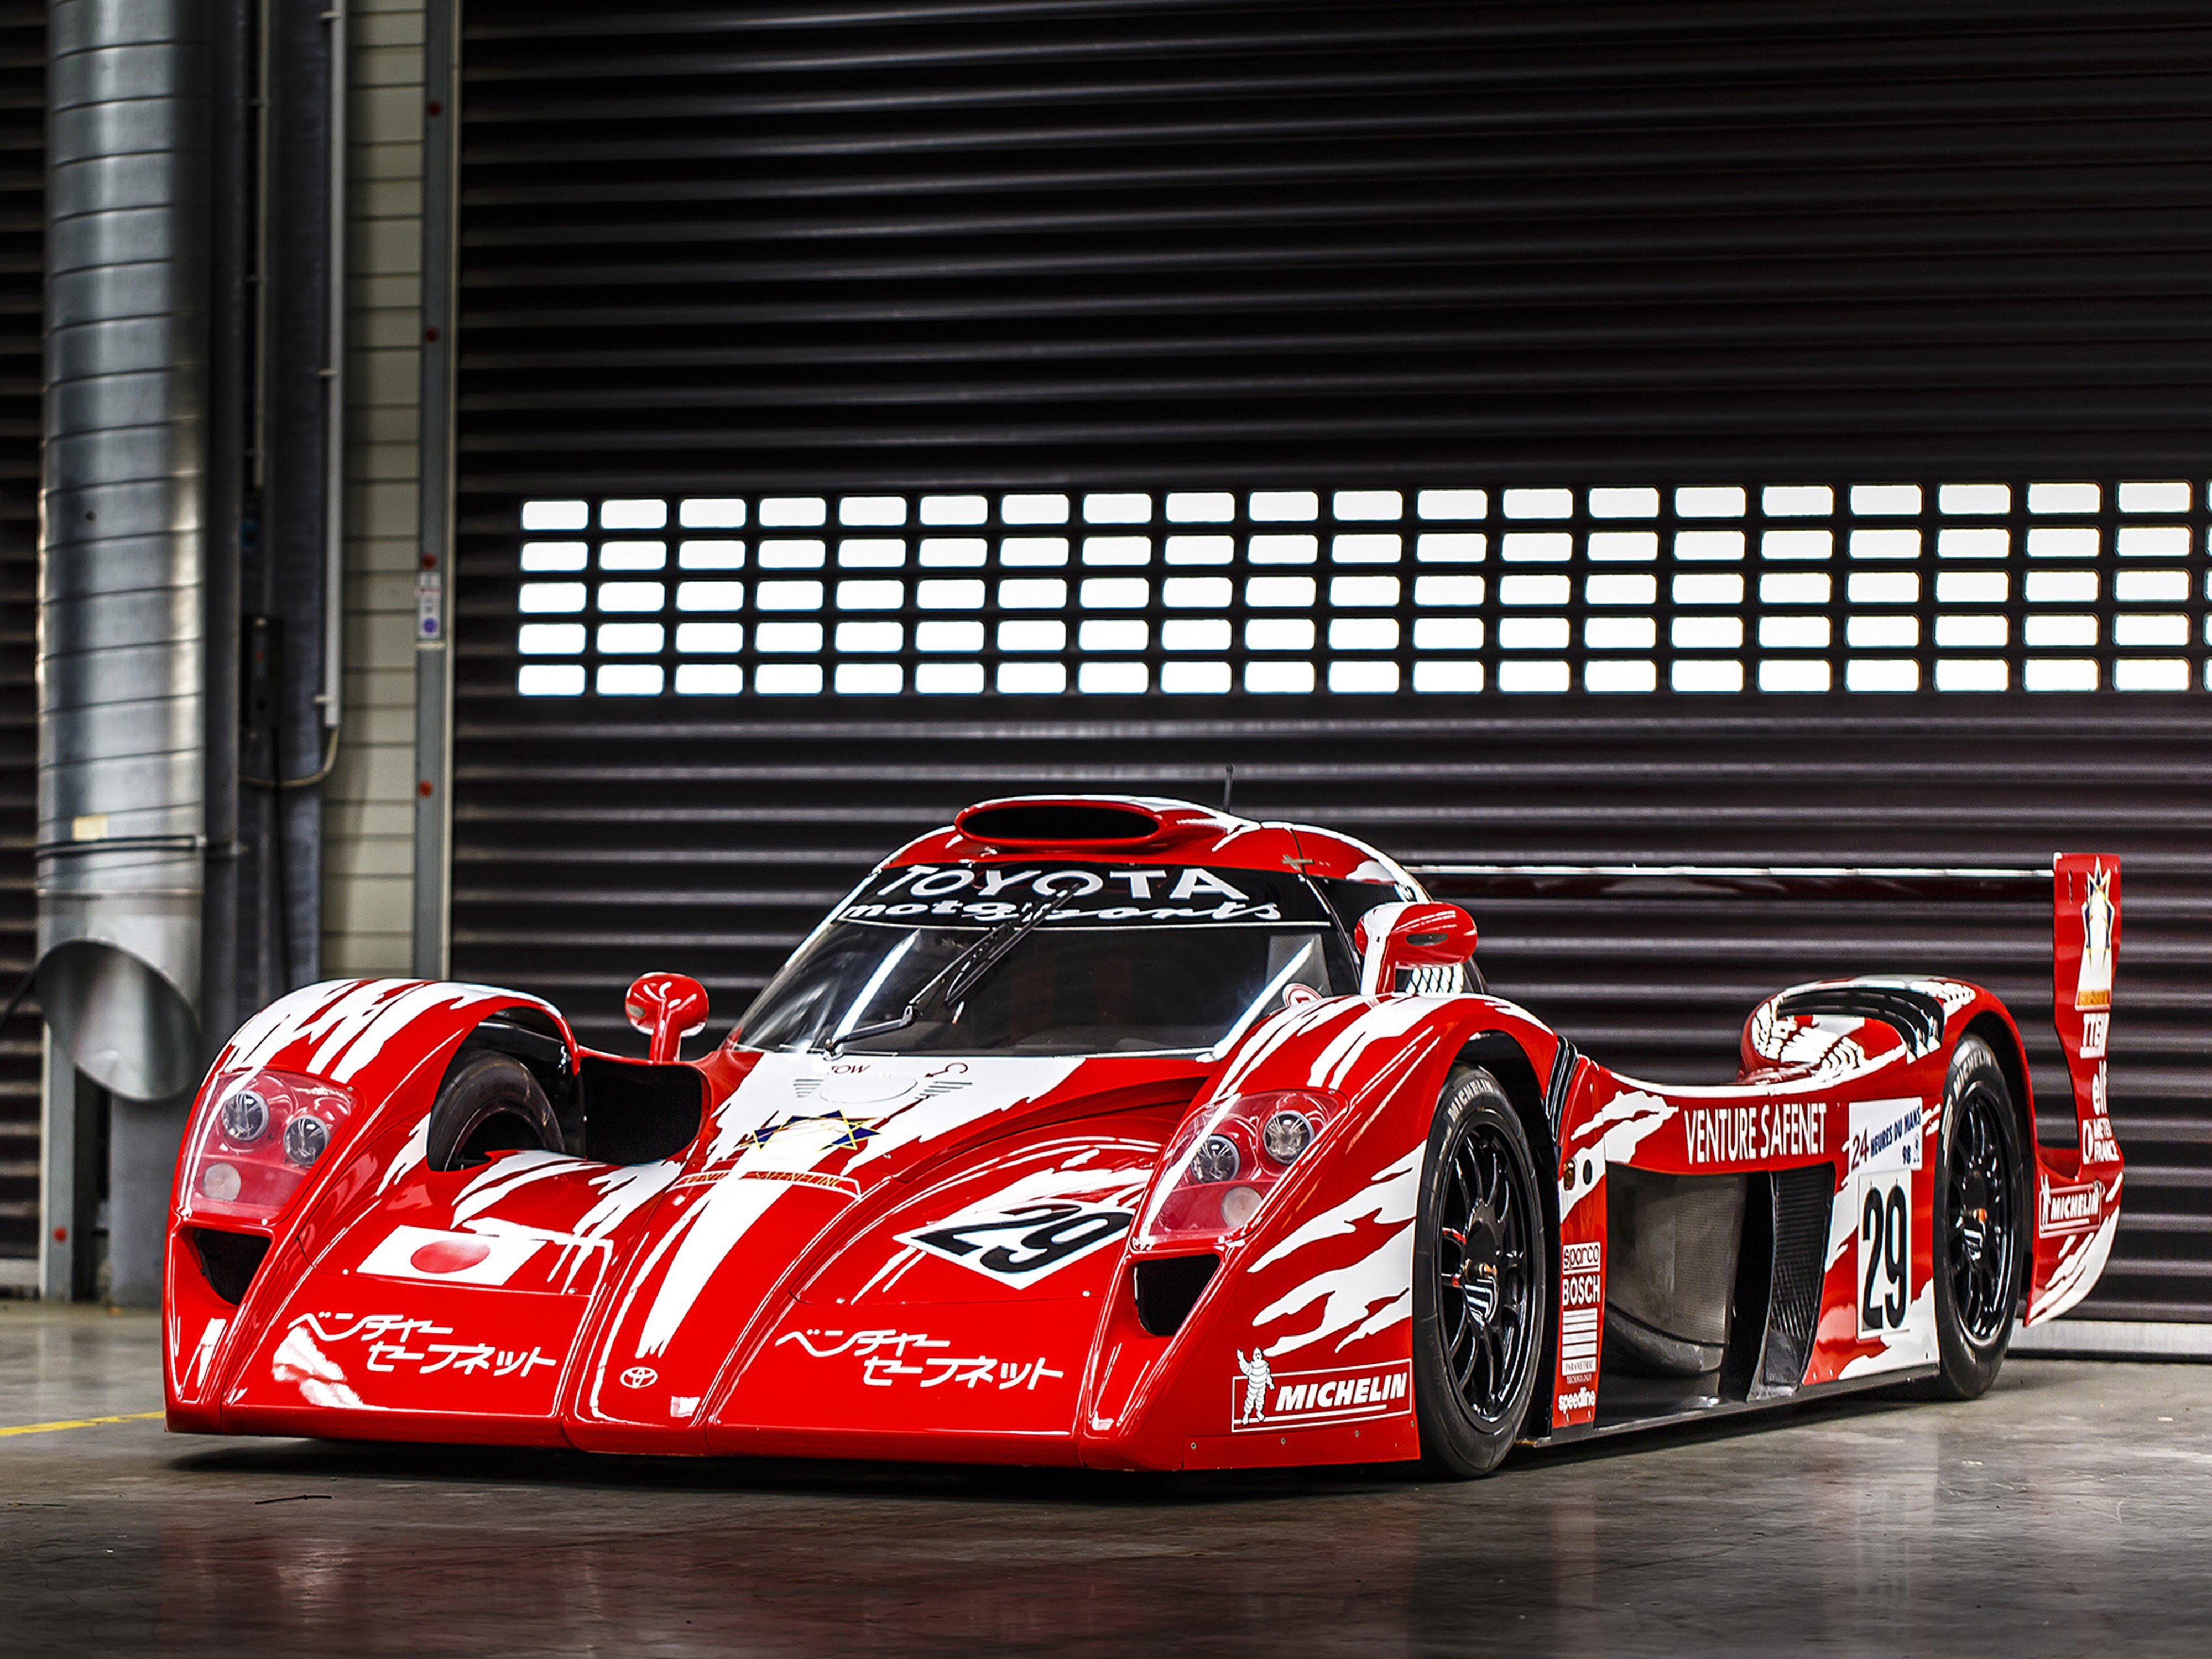 toyota, Gt one, Race, Racing, Lmp1, Le mans Wallpapers HD / Desktop and